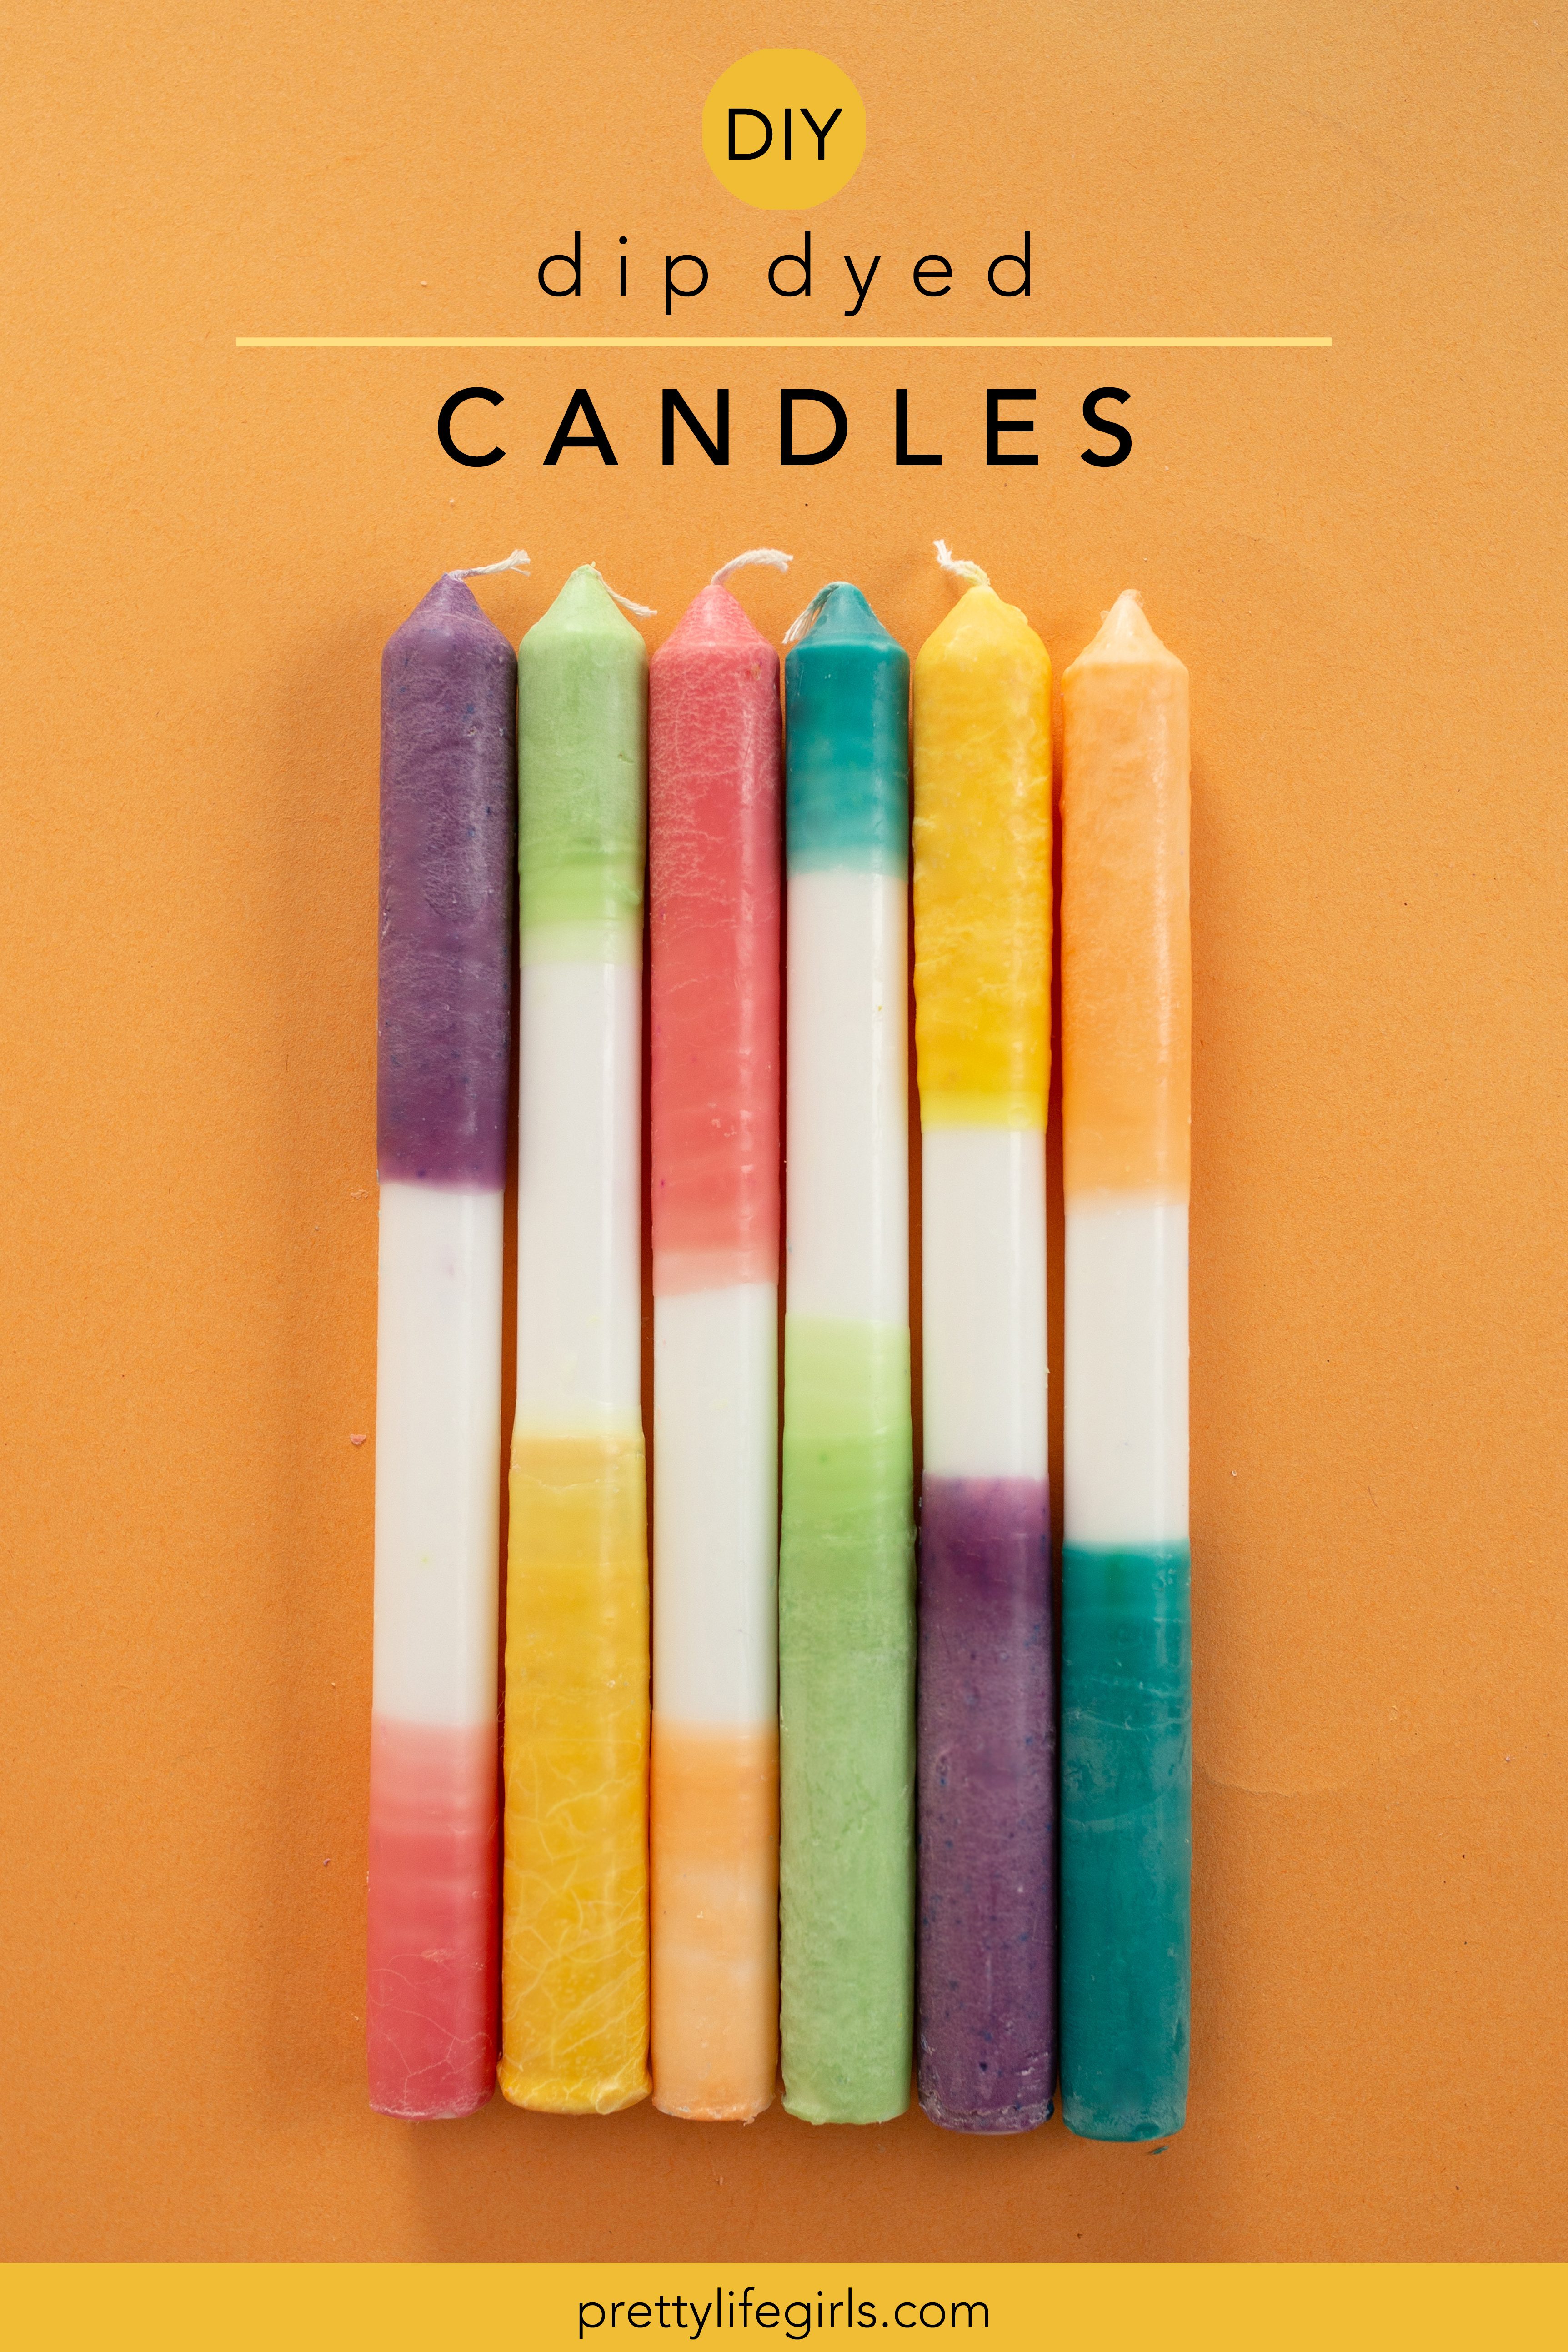 DIY Dip Dye Candles Tutorial + a tutorial featured by Top US Craft Blog + The Pretty Life Girls